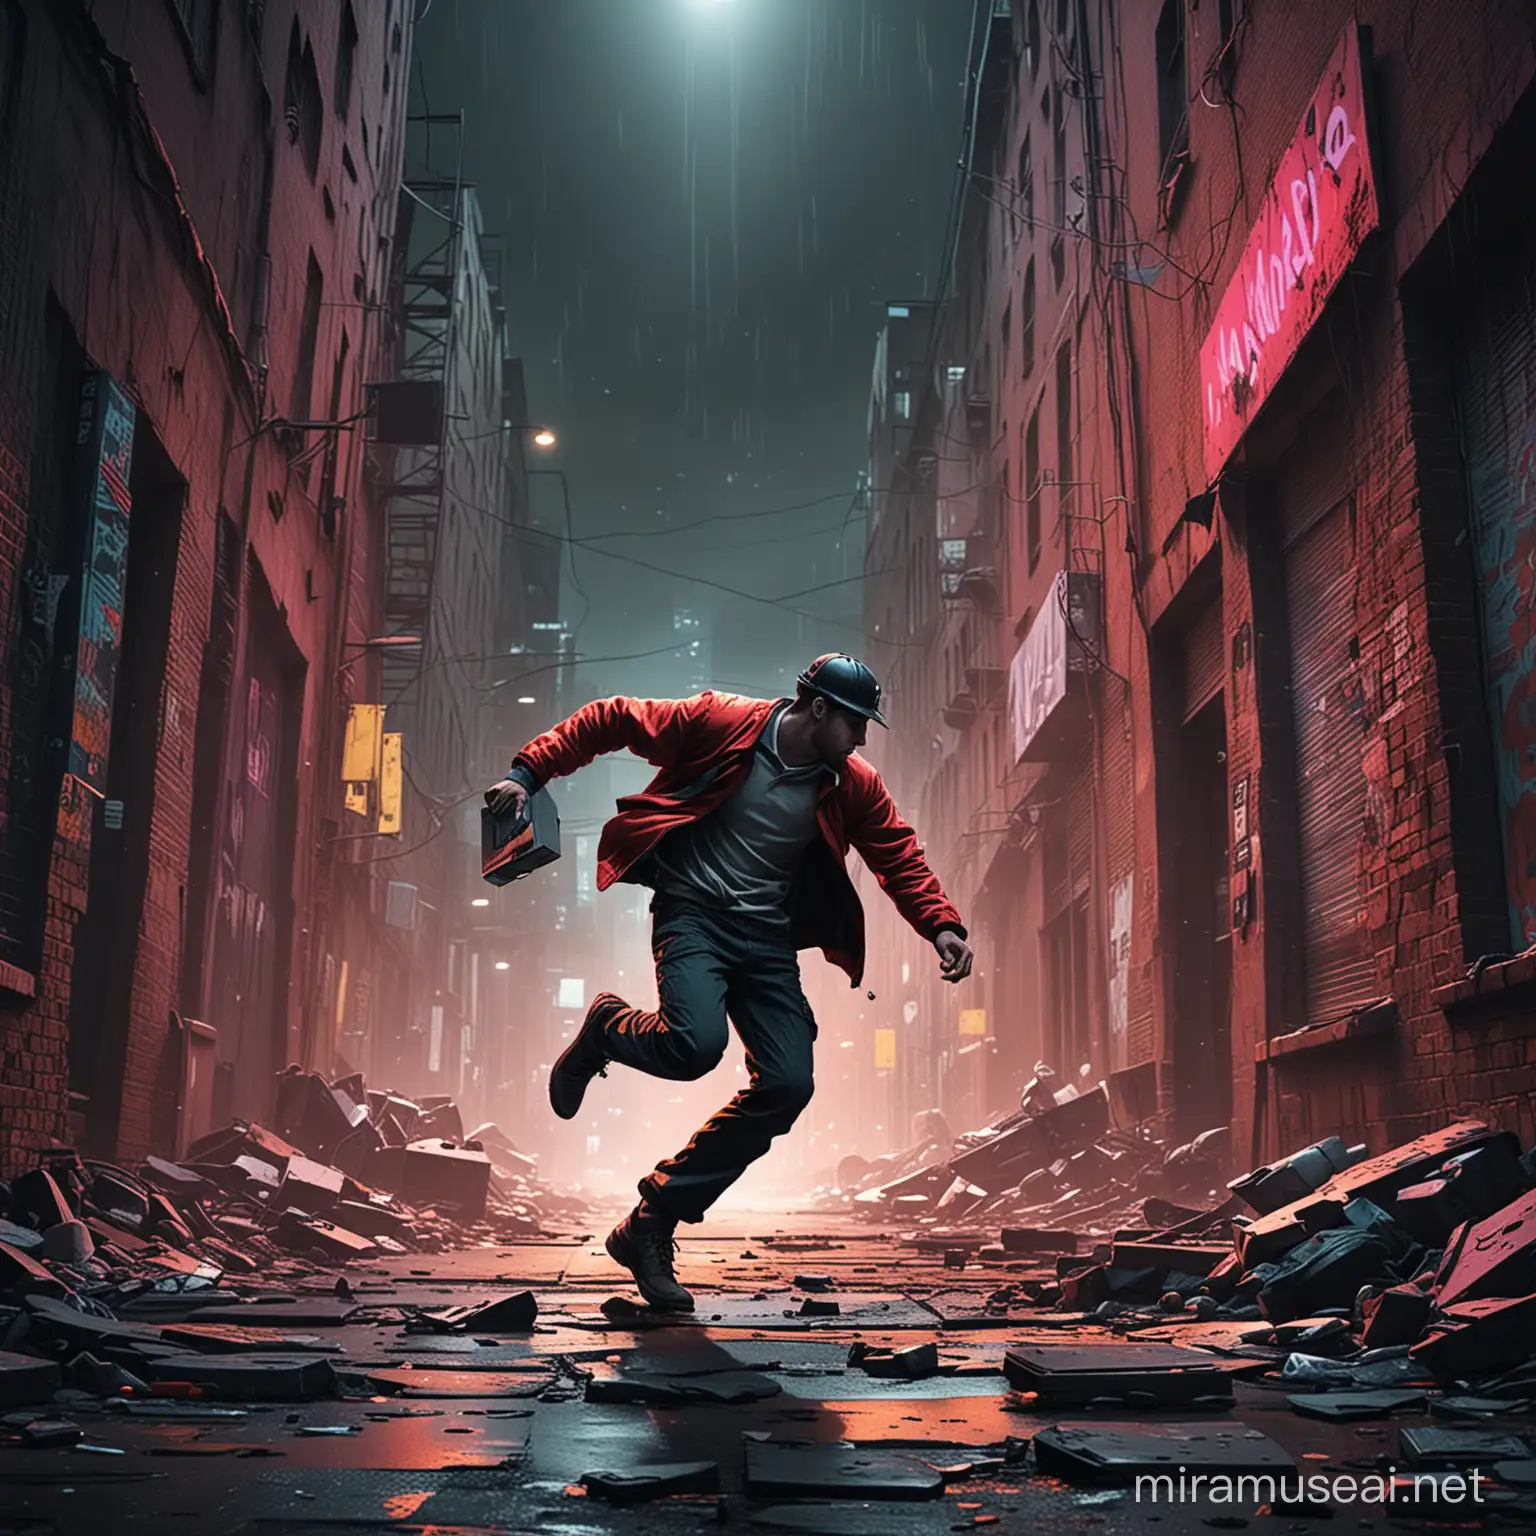 /imagine prompt: A hard disk drive fell to the ground, and a man ran to save it, depicted in a digital illustration style reminiscent of the works of Banksy, infused with urban grit and street art aesthetics. The scene unfolds with dynamic energy, capturing the urgency of the moment as the man reaches out to rescue the falling object. Bold, contrasting colors highlight the intensity of the situation, with the man's expression conveying determination and focus amidst the chaos. Illuminated by dramatic, neon lighting against a dark, urban backdrop, the scene pulsates with tension and motion. --v 5 --stylize 1000